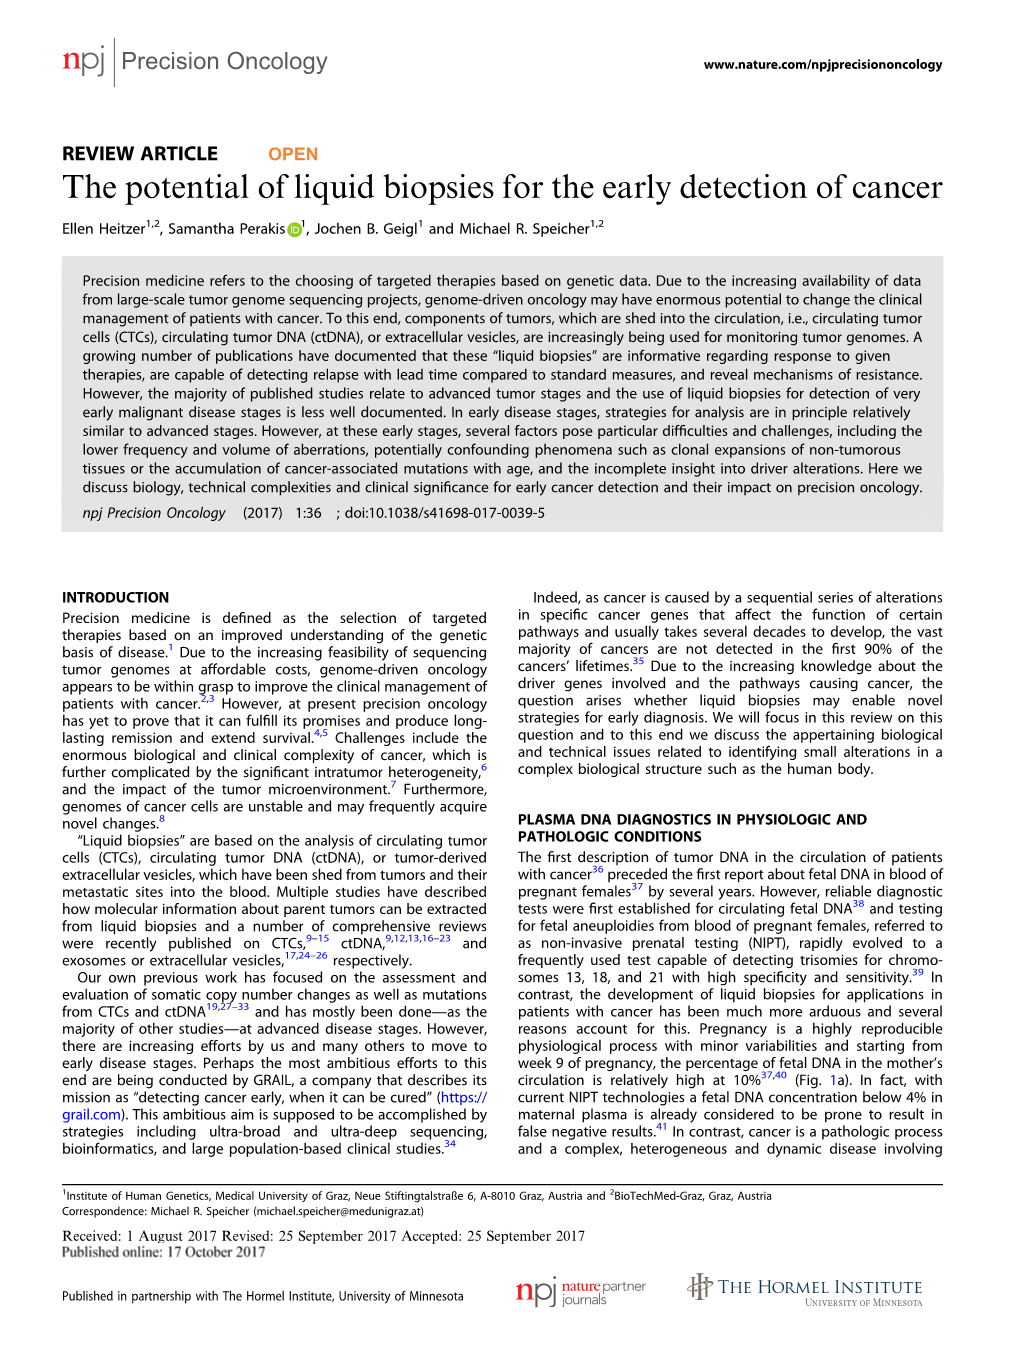 The Potential of Liquid Biopsies for the Early Detection of Cancer